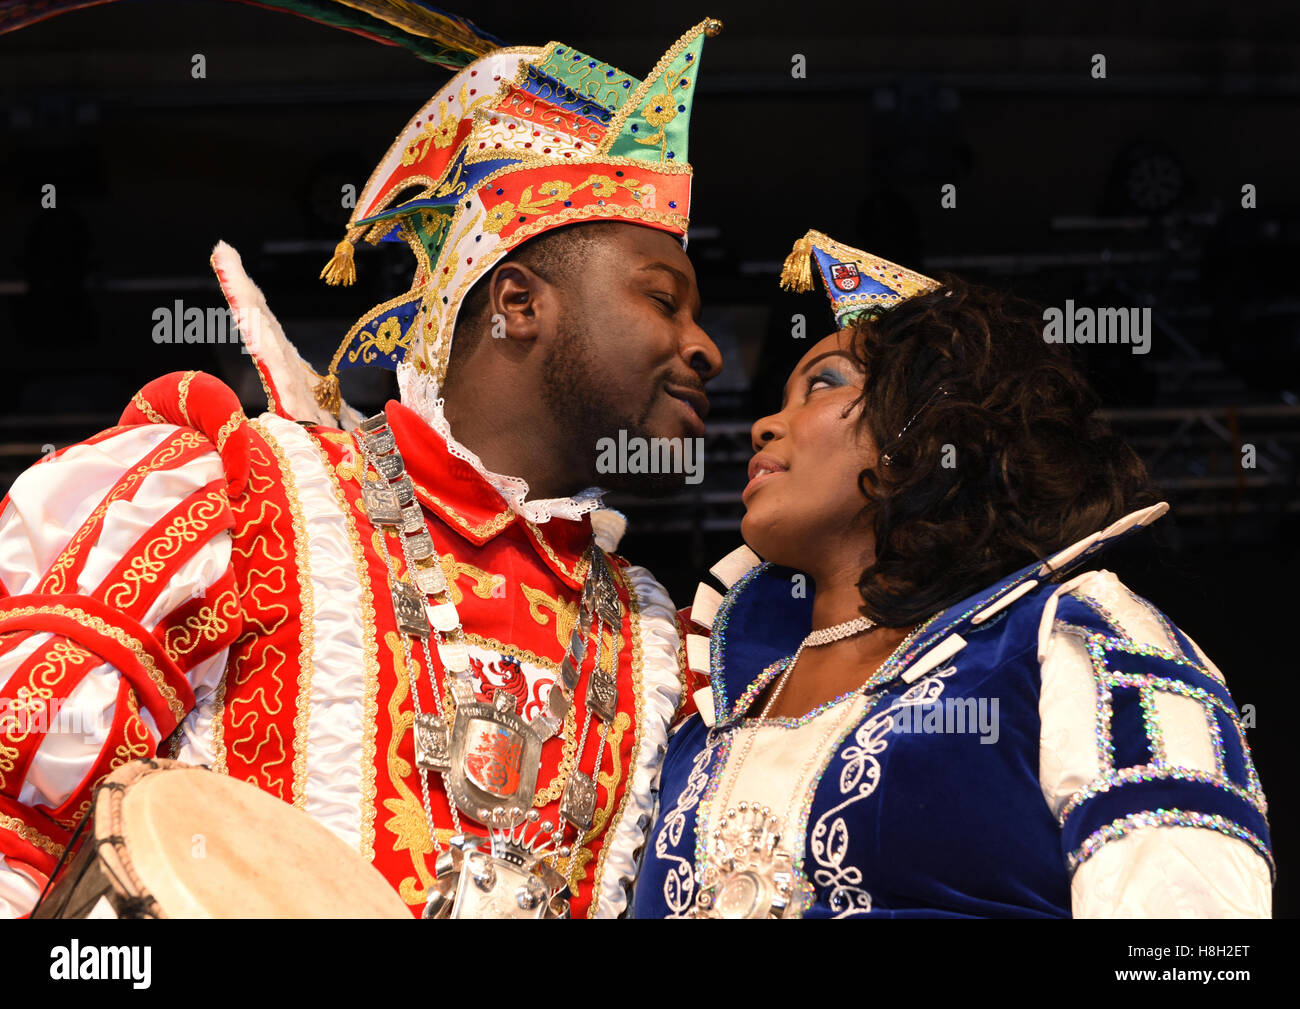 Ratingen, Germany. 12th Nov, 2016. The Carneval's royal couple Samuel and Jacinta Awasum, Prince Samuel I. and Princess Jacinta I of Ratingen stand before the official election in the city hall of Ratingen, Germany, 12 November 2016. Both people have Cameroonian ancestry. Photo: Horst Ossinger/dpa/Alamy Live News Stock Photo